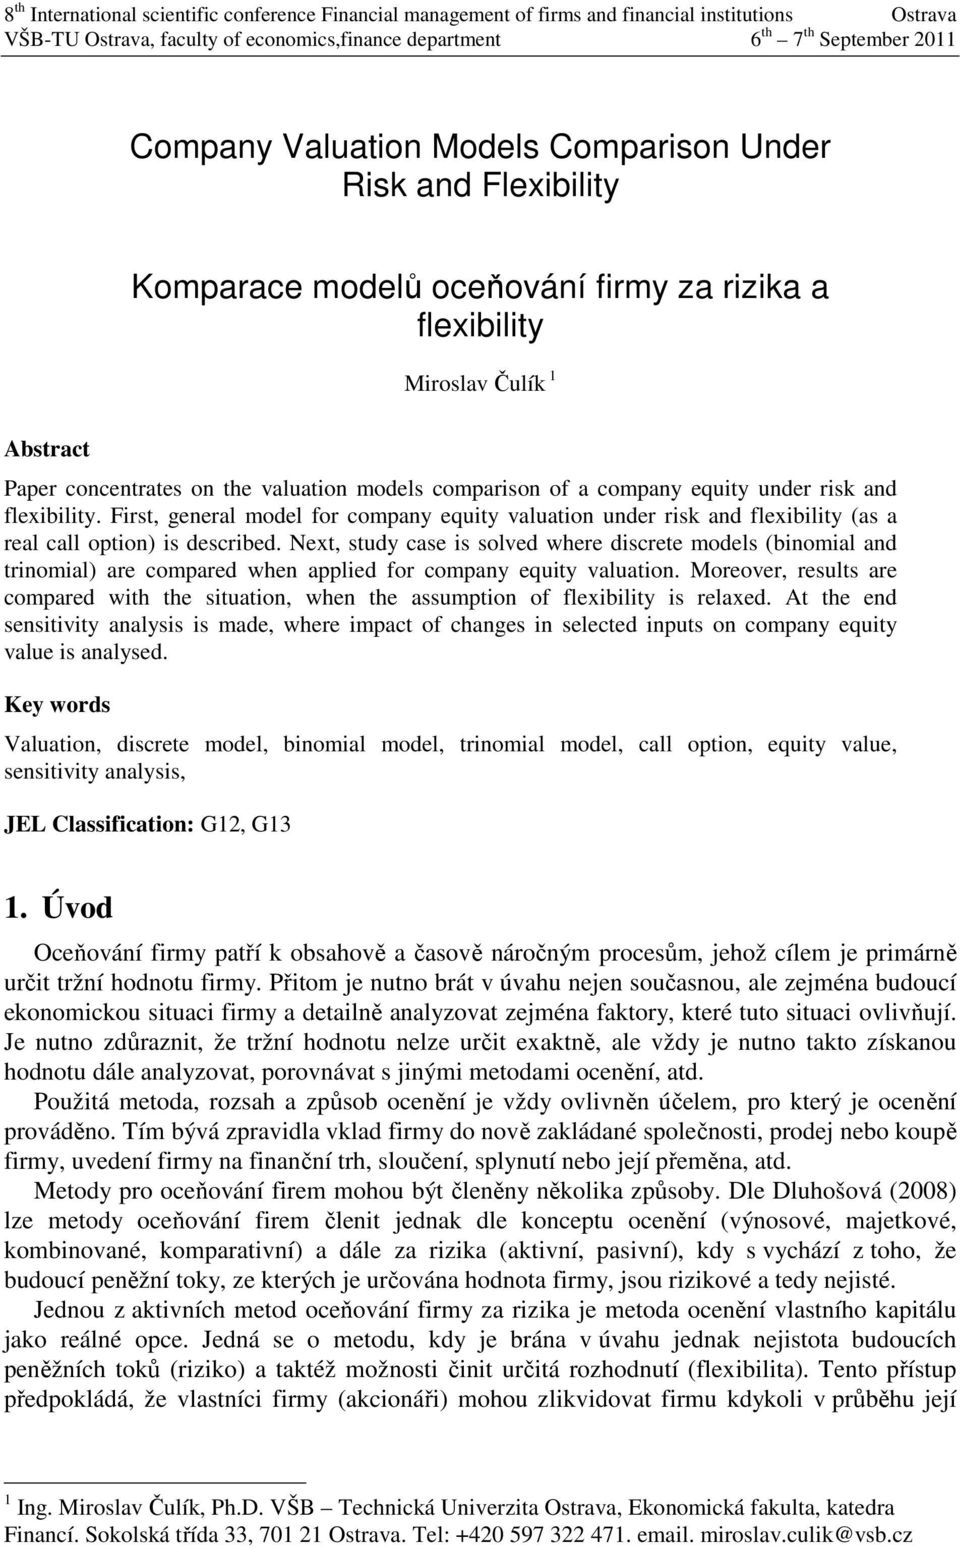 and flexibiliy. Firs, general model for company equiy valuaion under risk and flexibiliy (as a real call opion) is described.